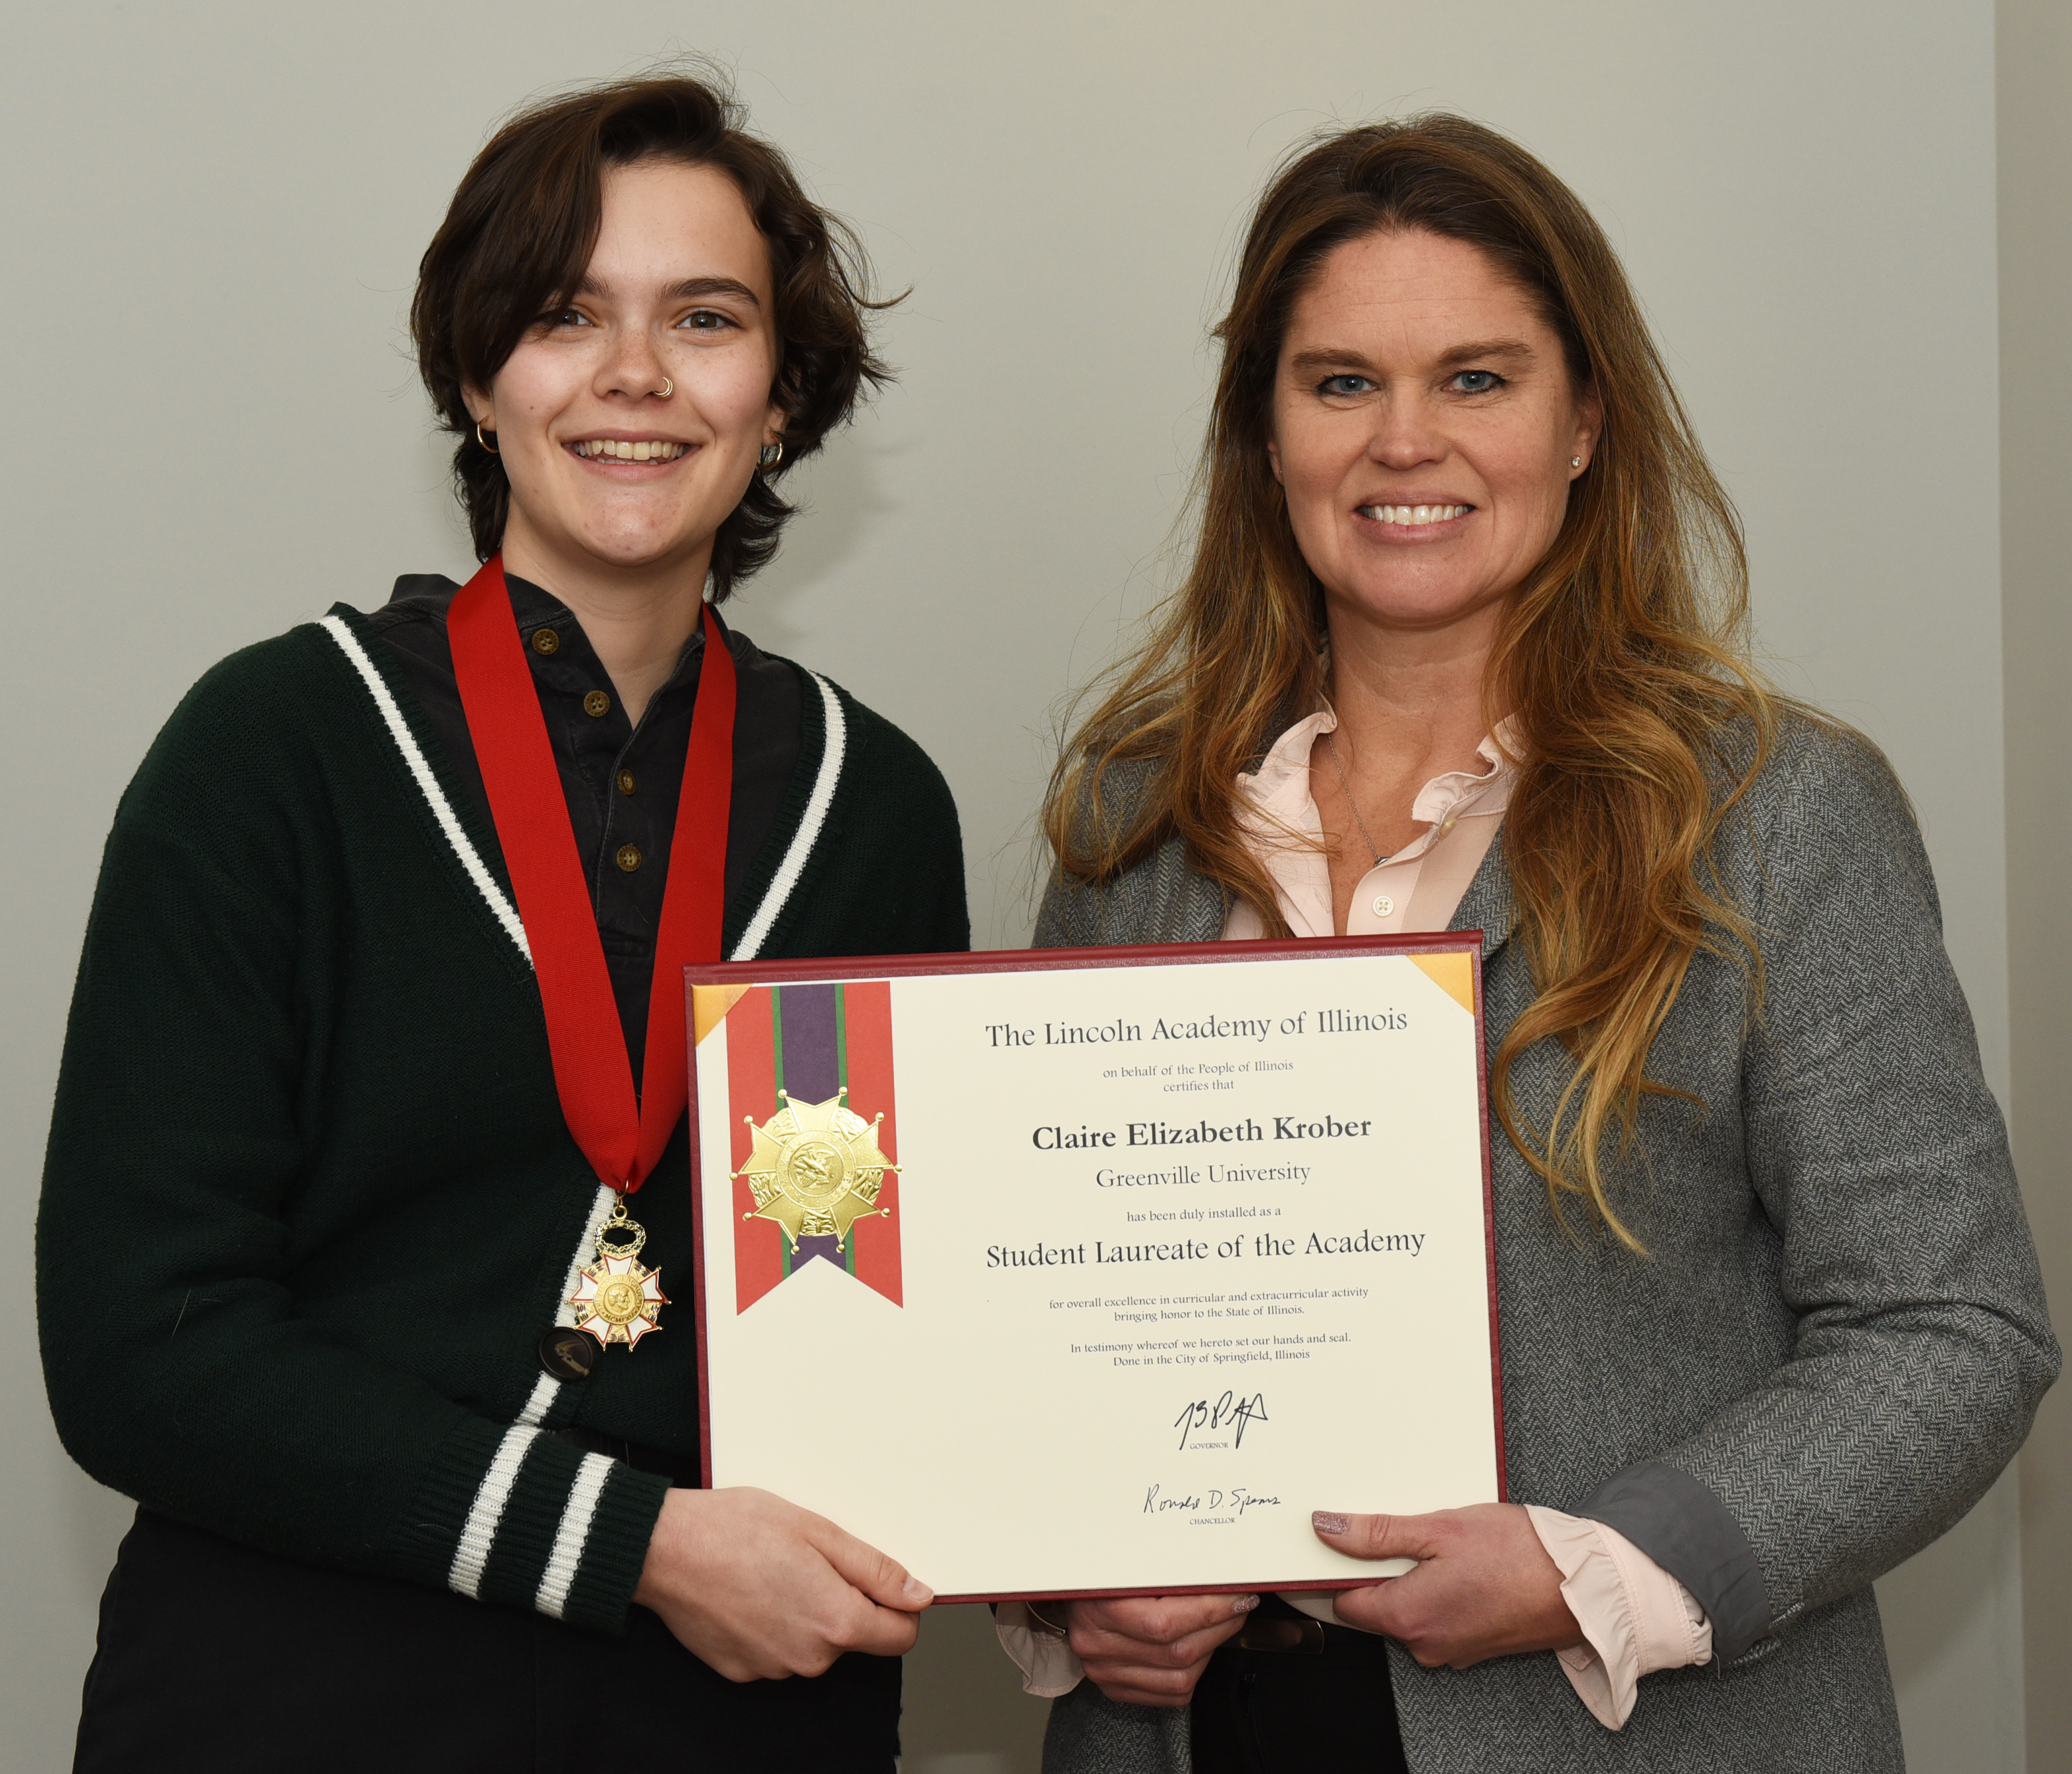 Claire Krober honored as Lincoln Academy Student Laureate